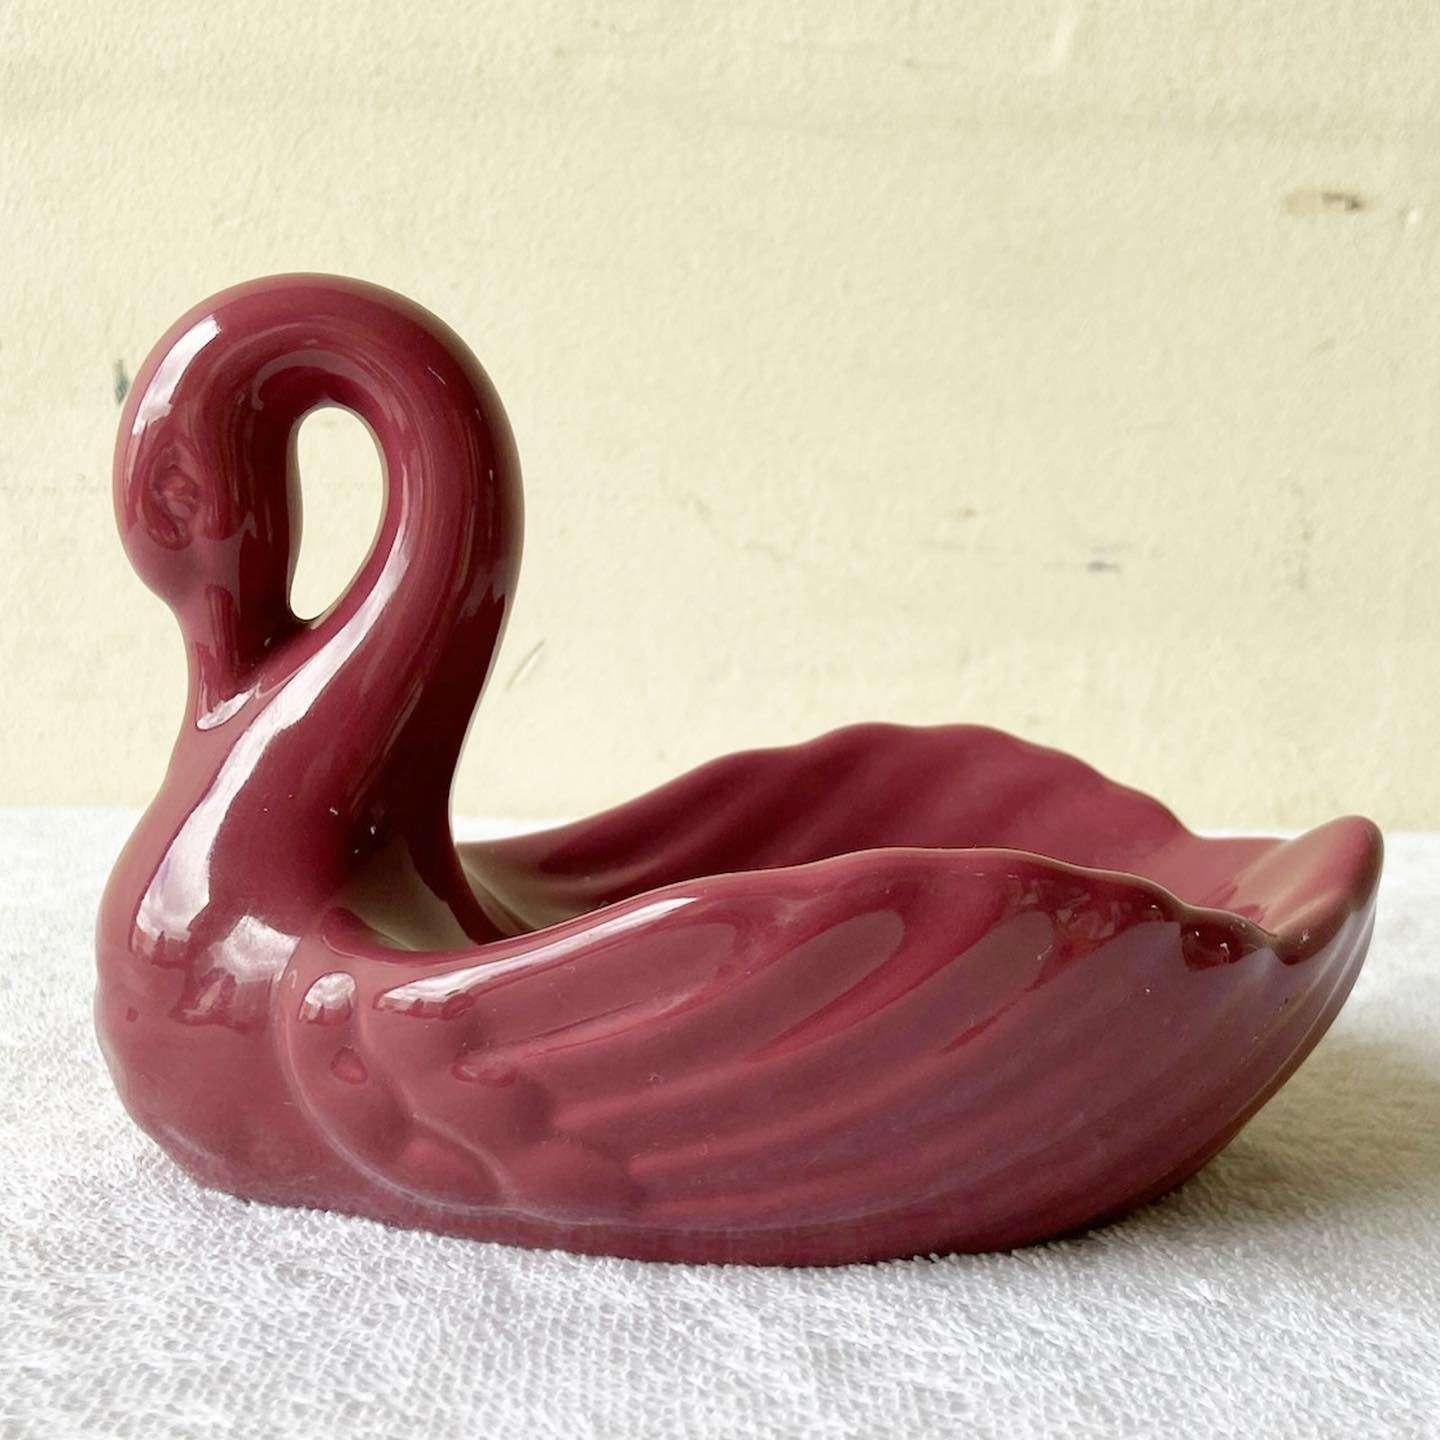 Amazing vintage postmodern swan sofa dish. Features a glossy pink finish.
